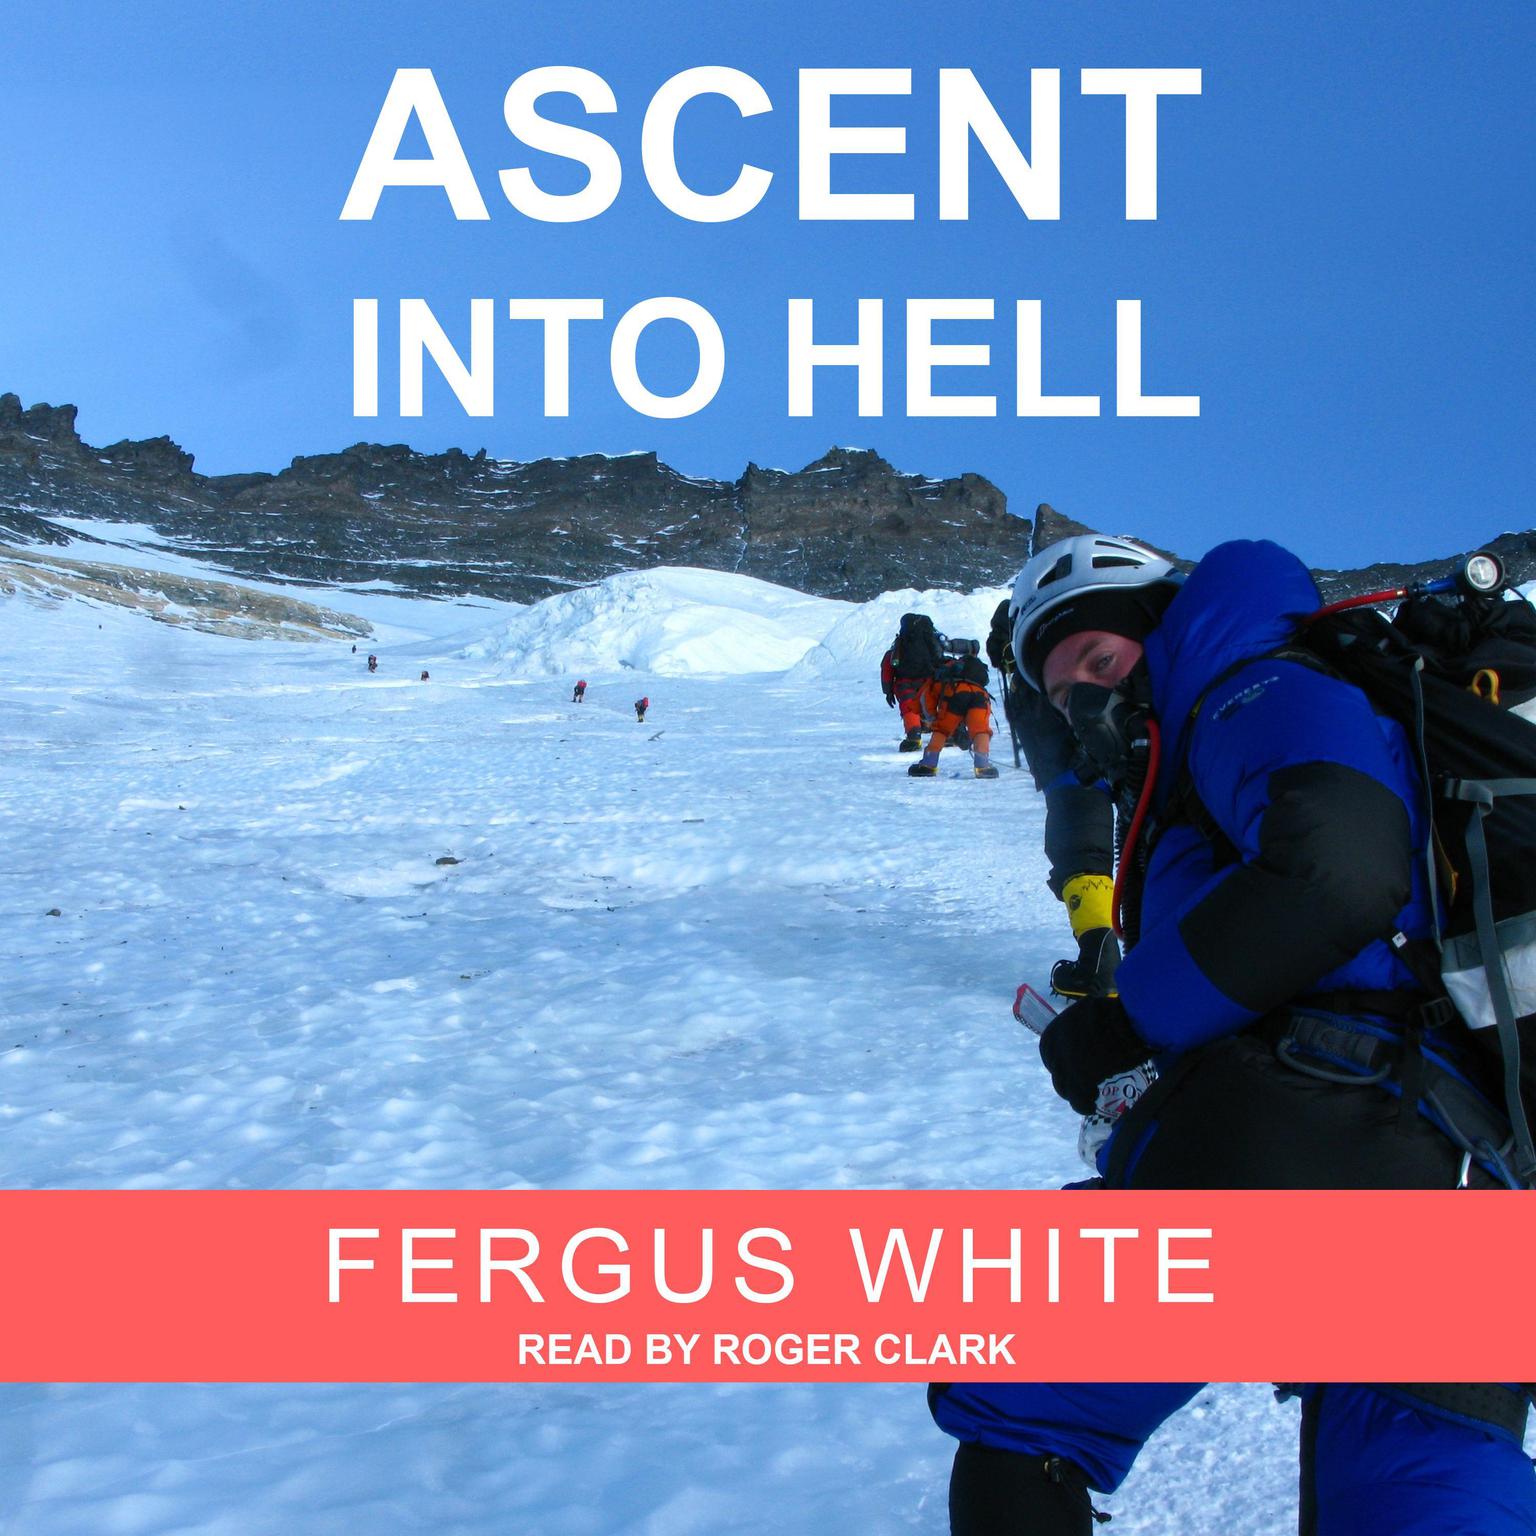 Ascent into Hell Audiobook, by Fergus White